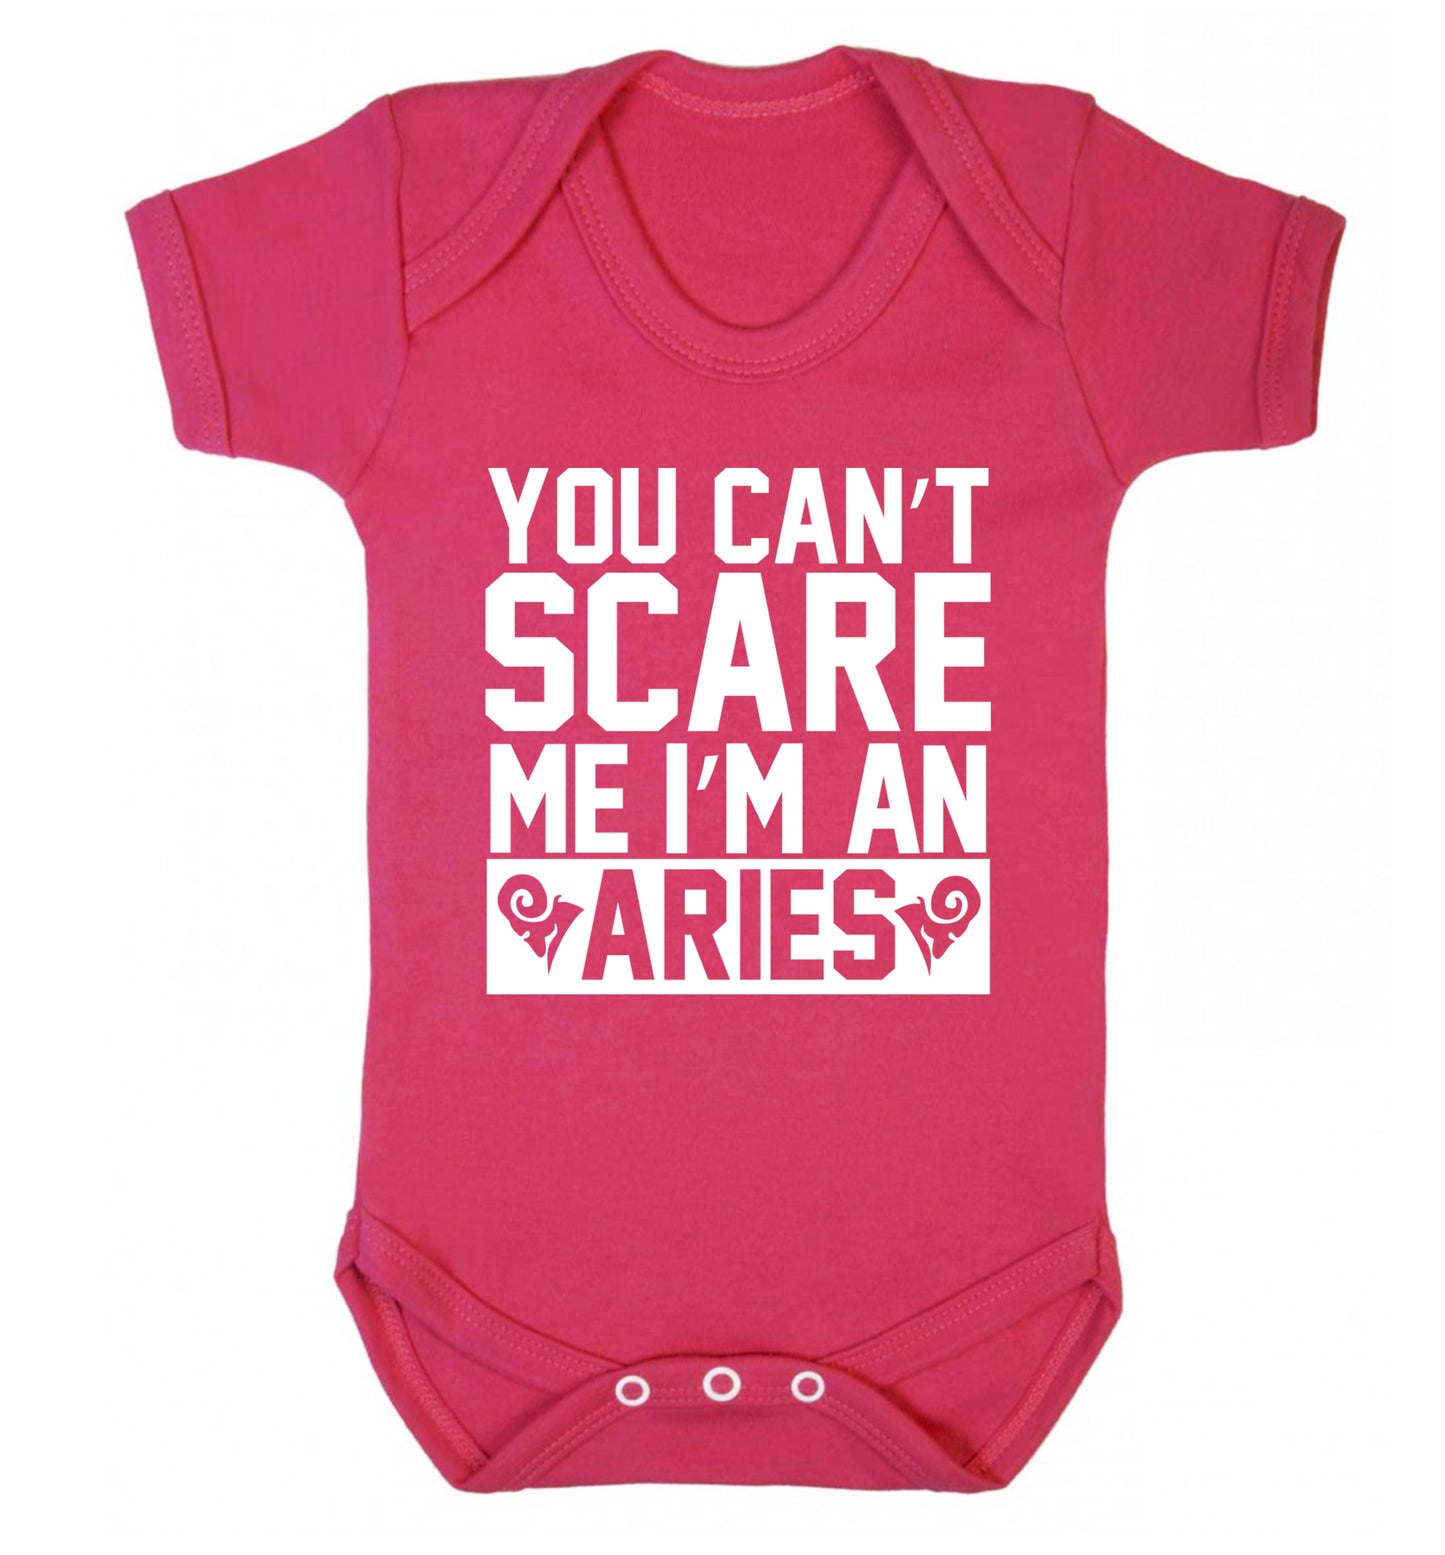 You can't scare me I'm an aries Baby Vest dark pink 18-24 months